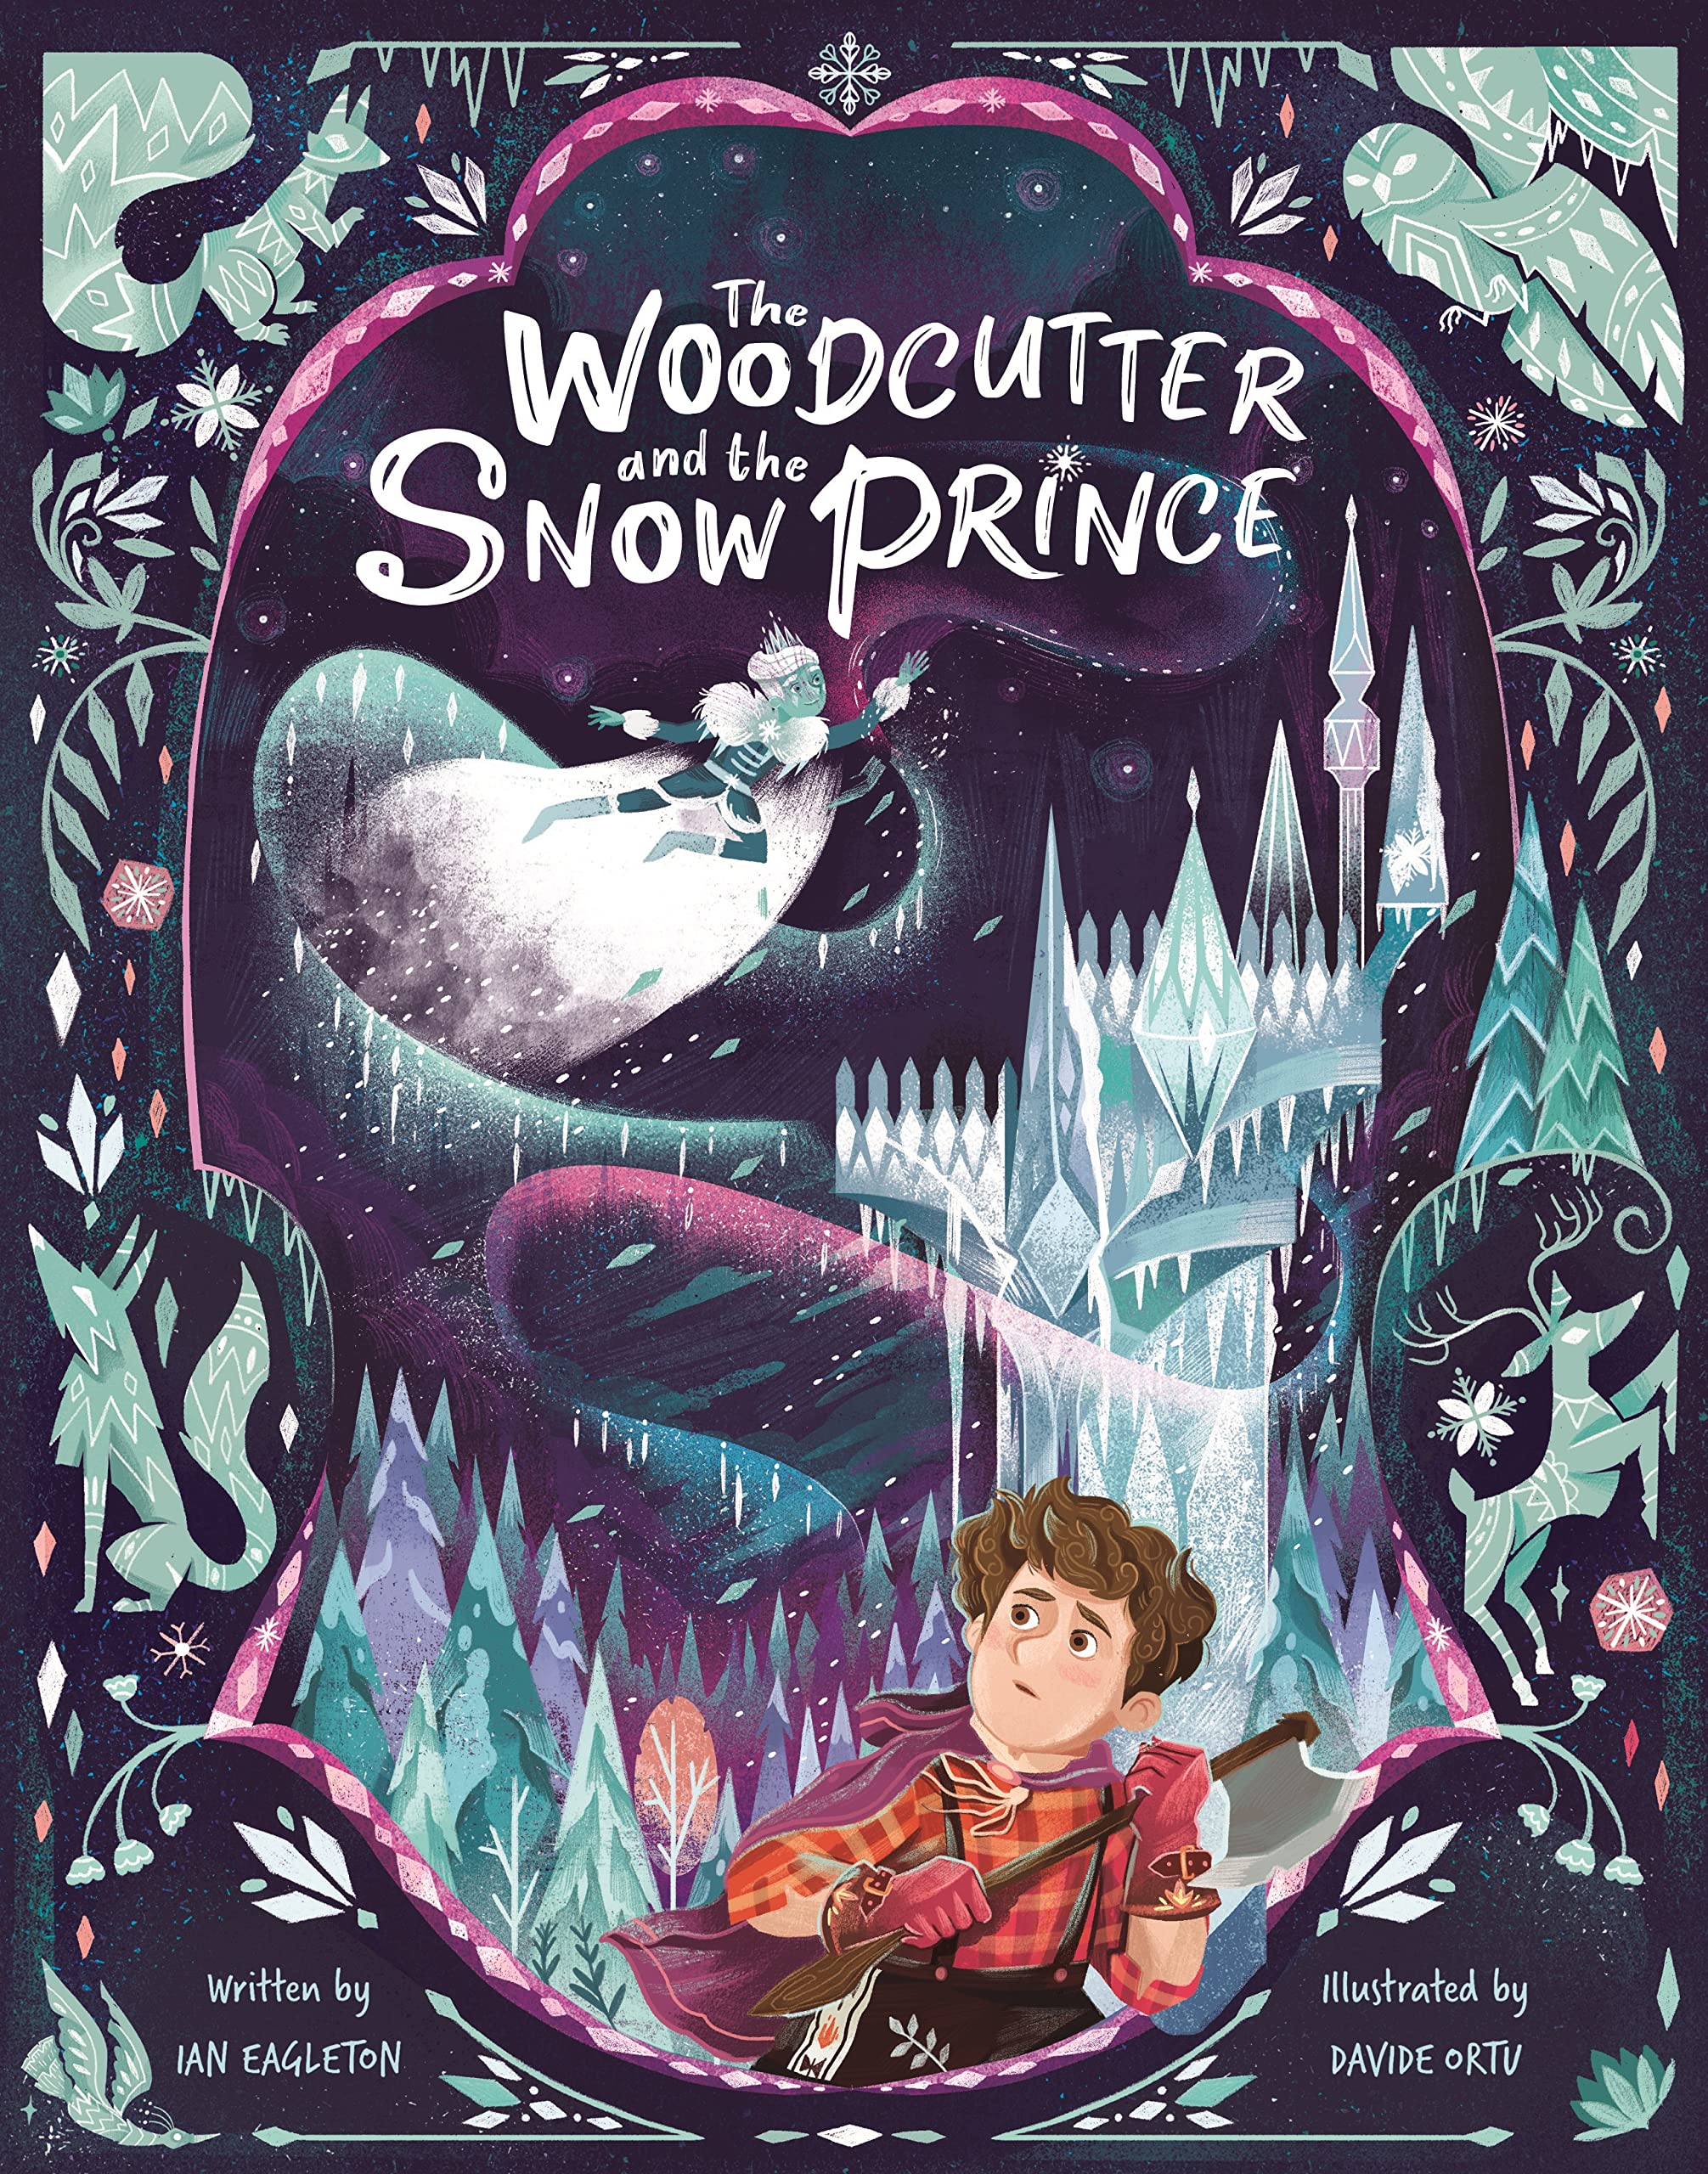 Truyện tranh thiếu nhi  tiếng Anh: The Woodcutter And The Snow Prince